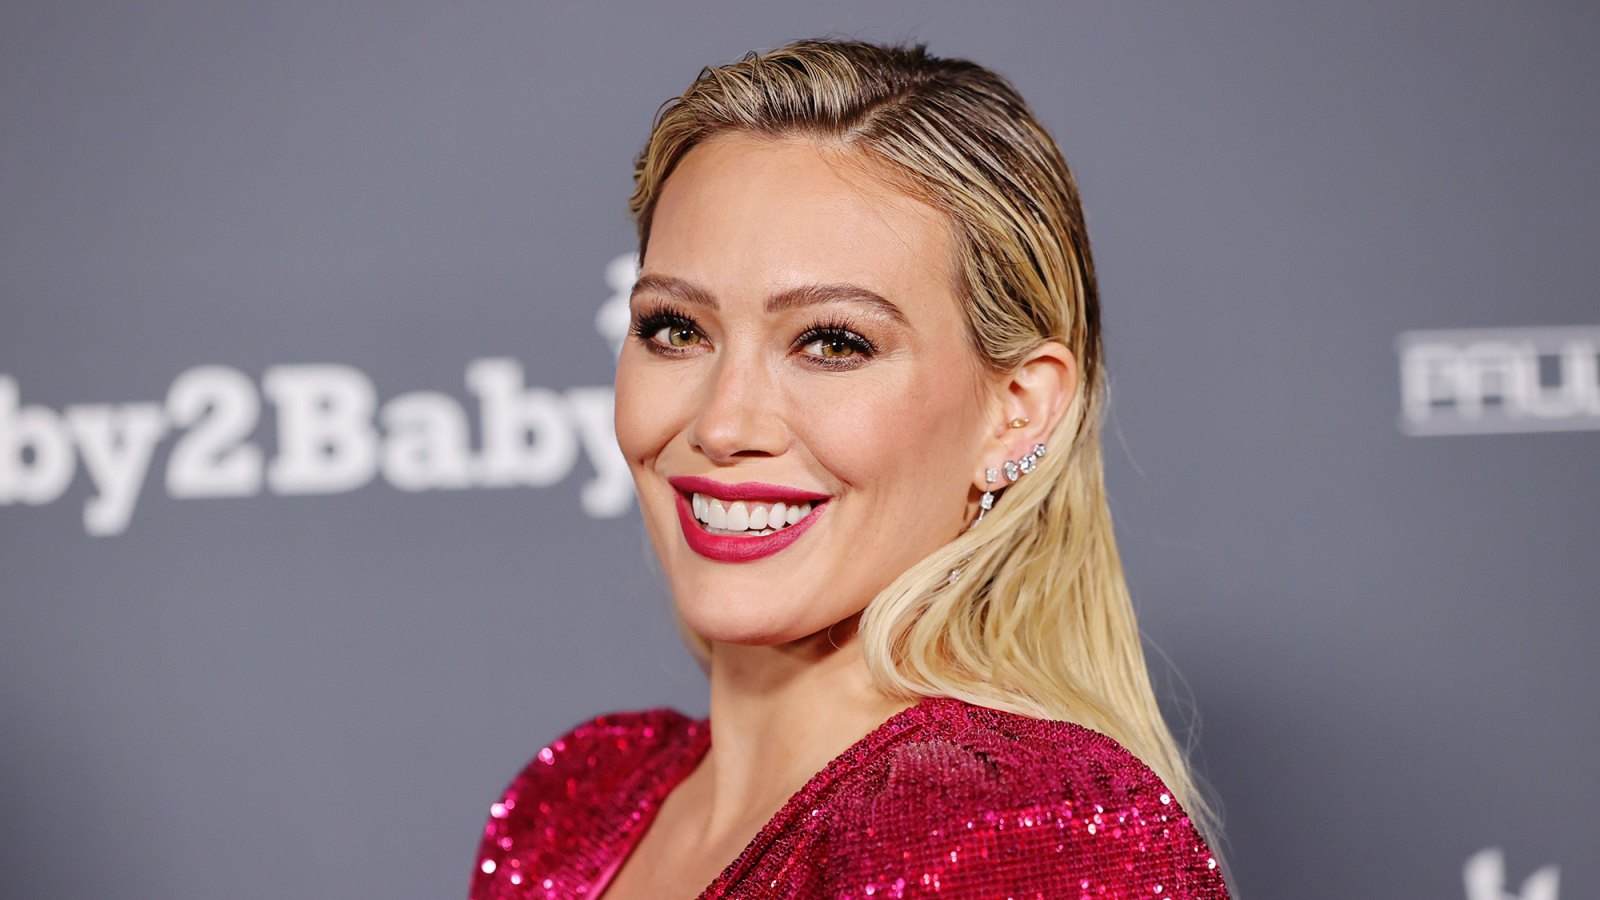 Pregnant Hilary Duff Jokes She Has Been ‘Trying to Hide’ Her Baby Bump ‘For a Minute’